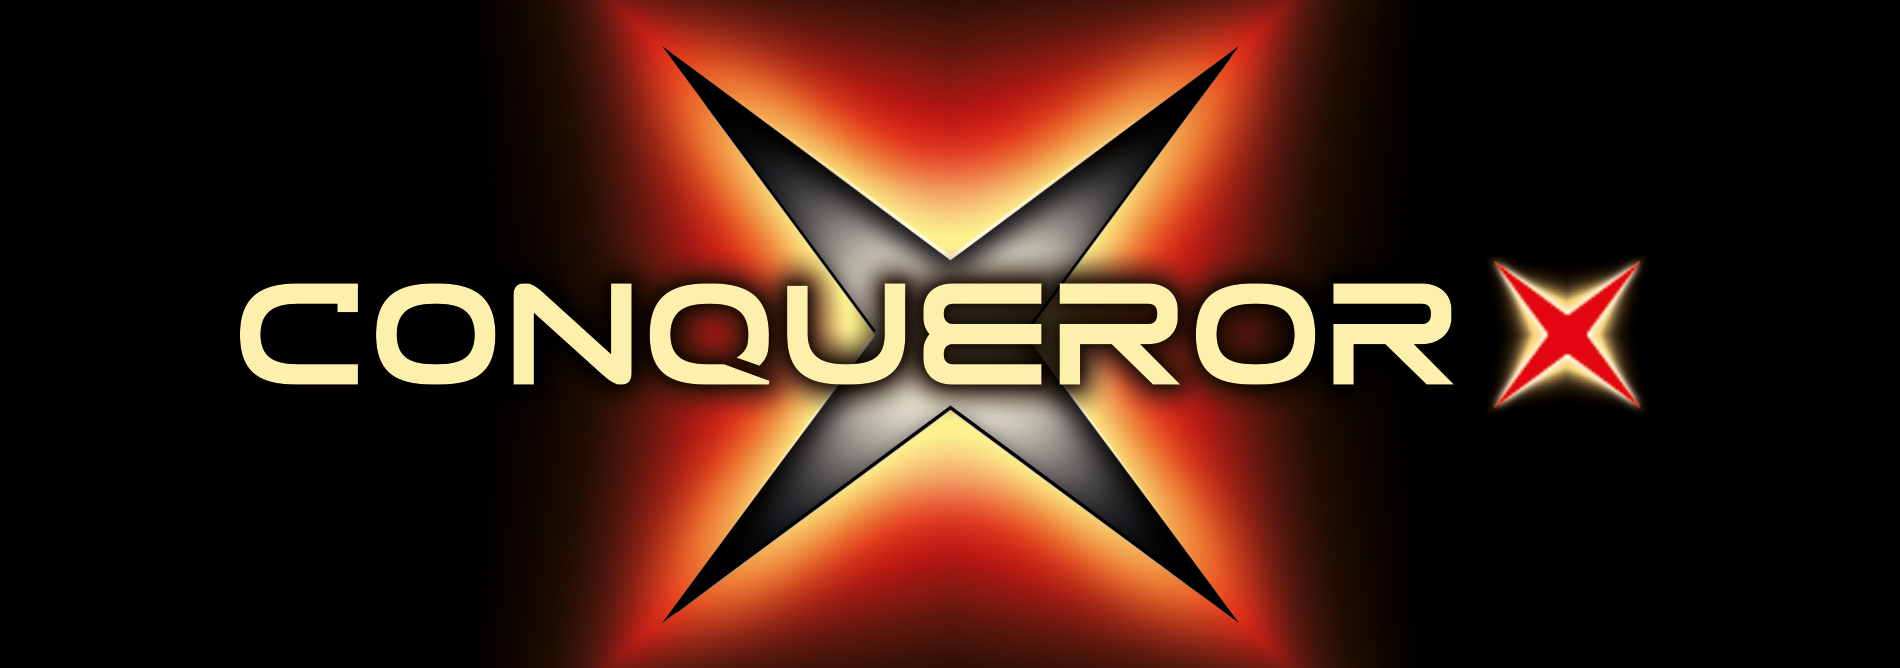 QubicaAMF Bowling Conqueror X banner slide.jpeg